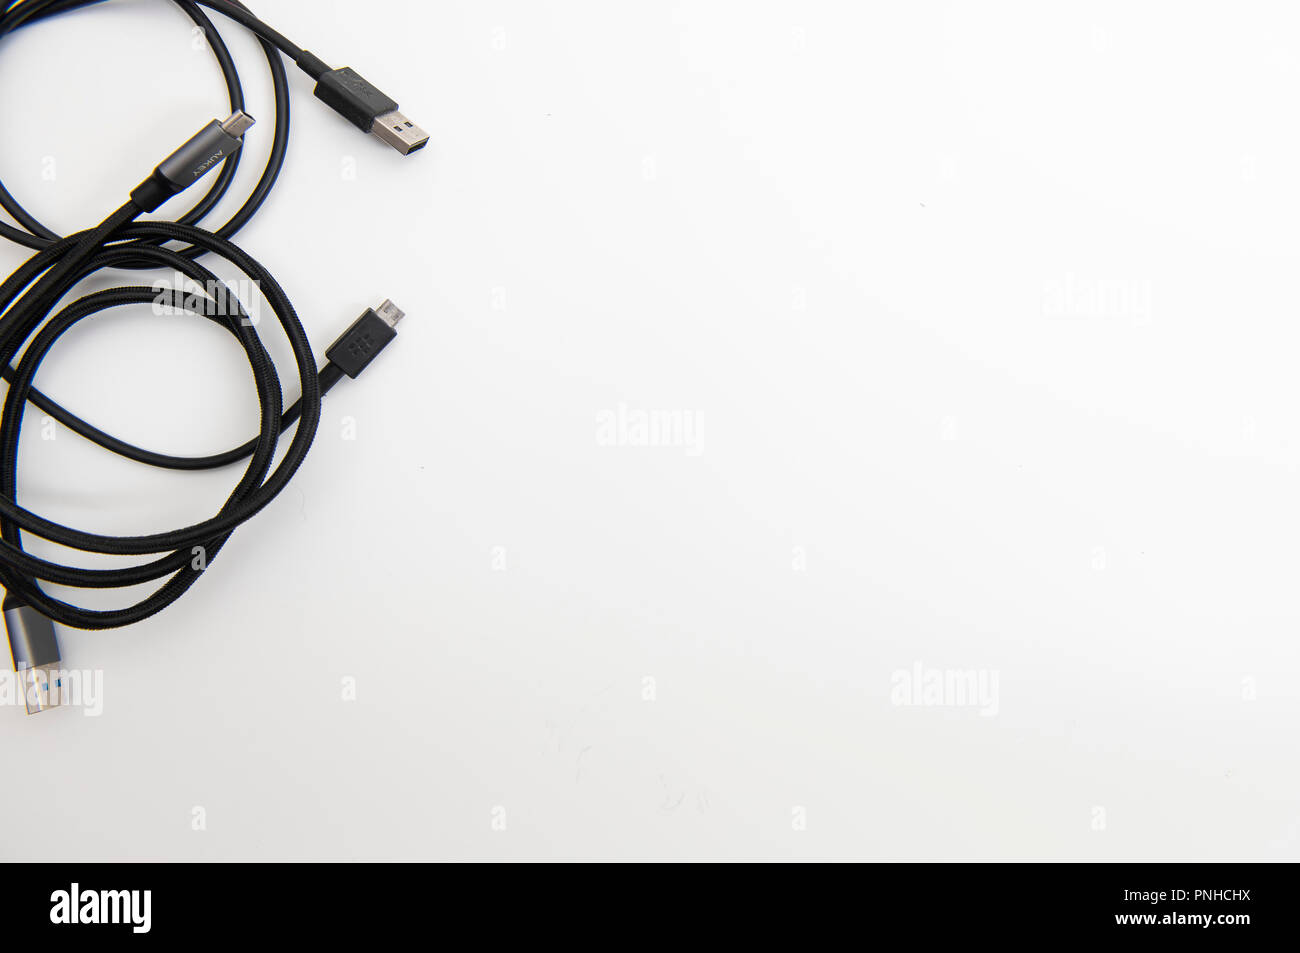 White desk with various USB cables. Stock Photo